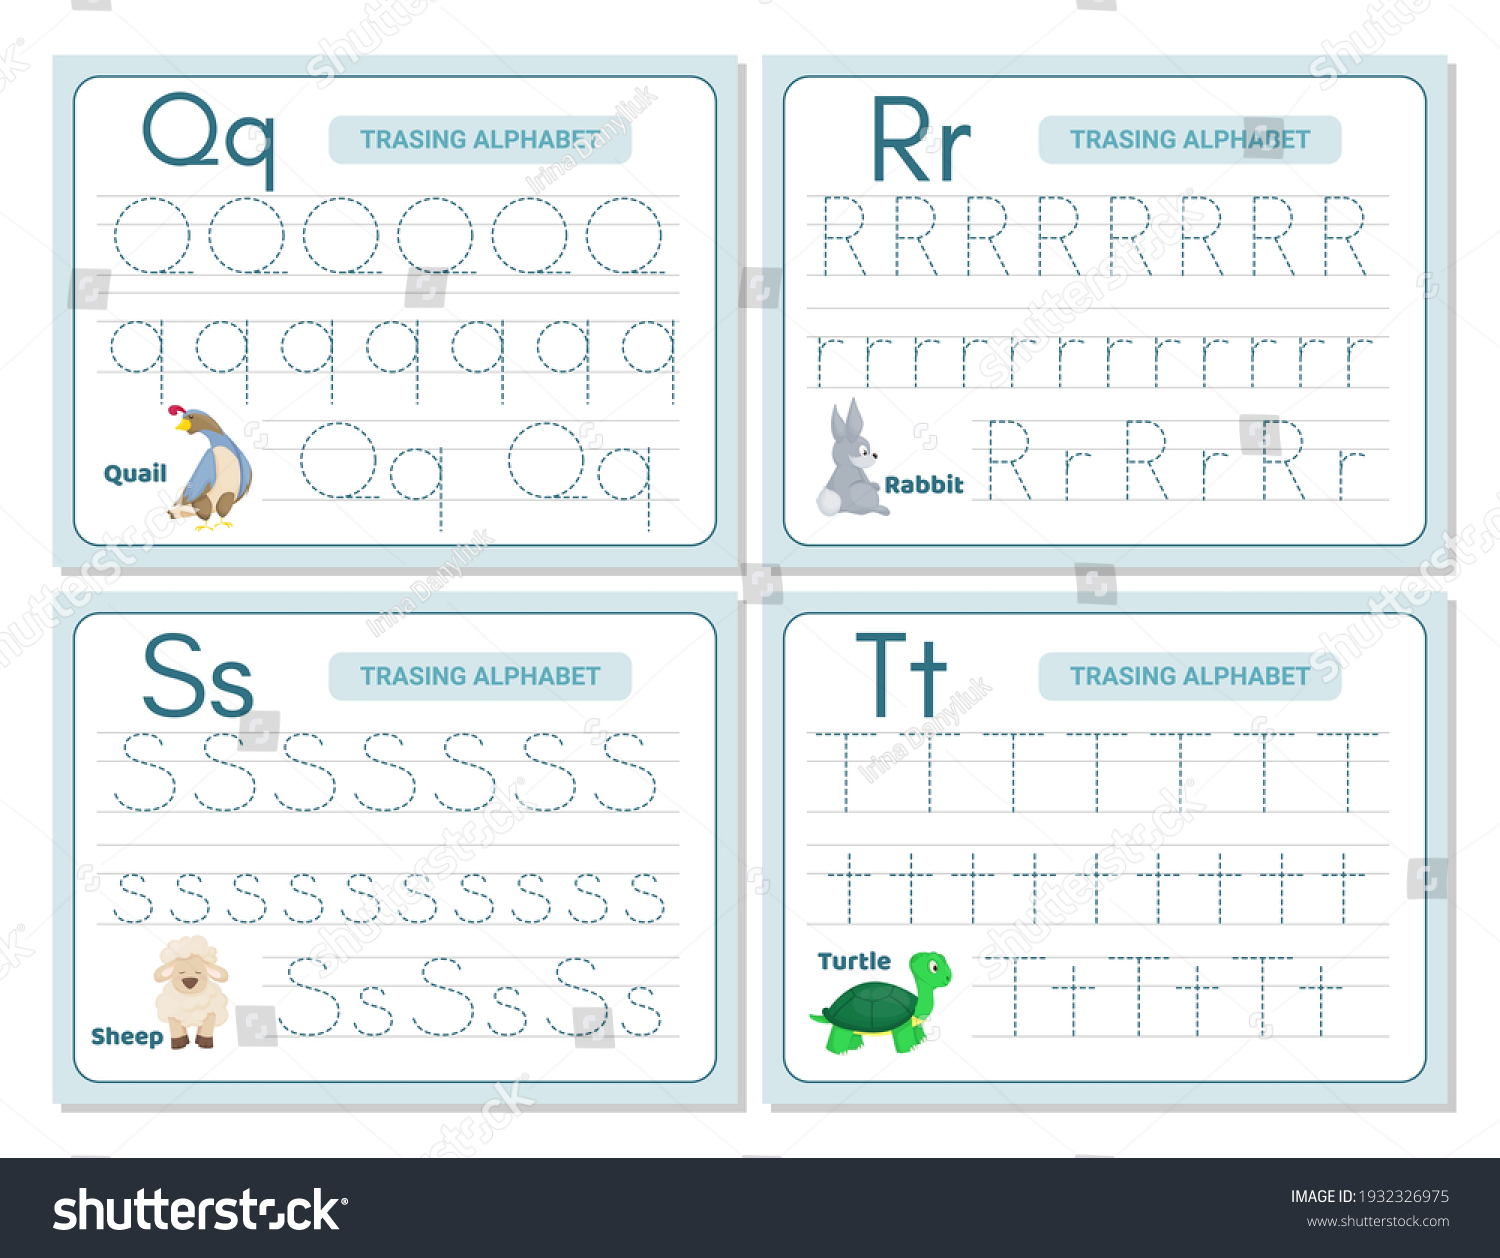 18,474 Trace words Images, Stock Photos & Vectors | Shutterstock